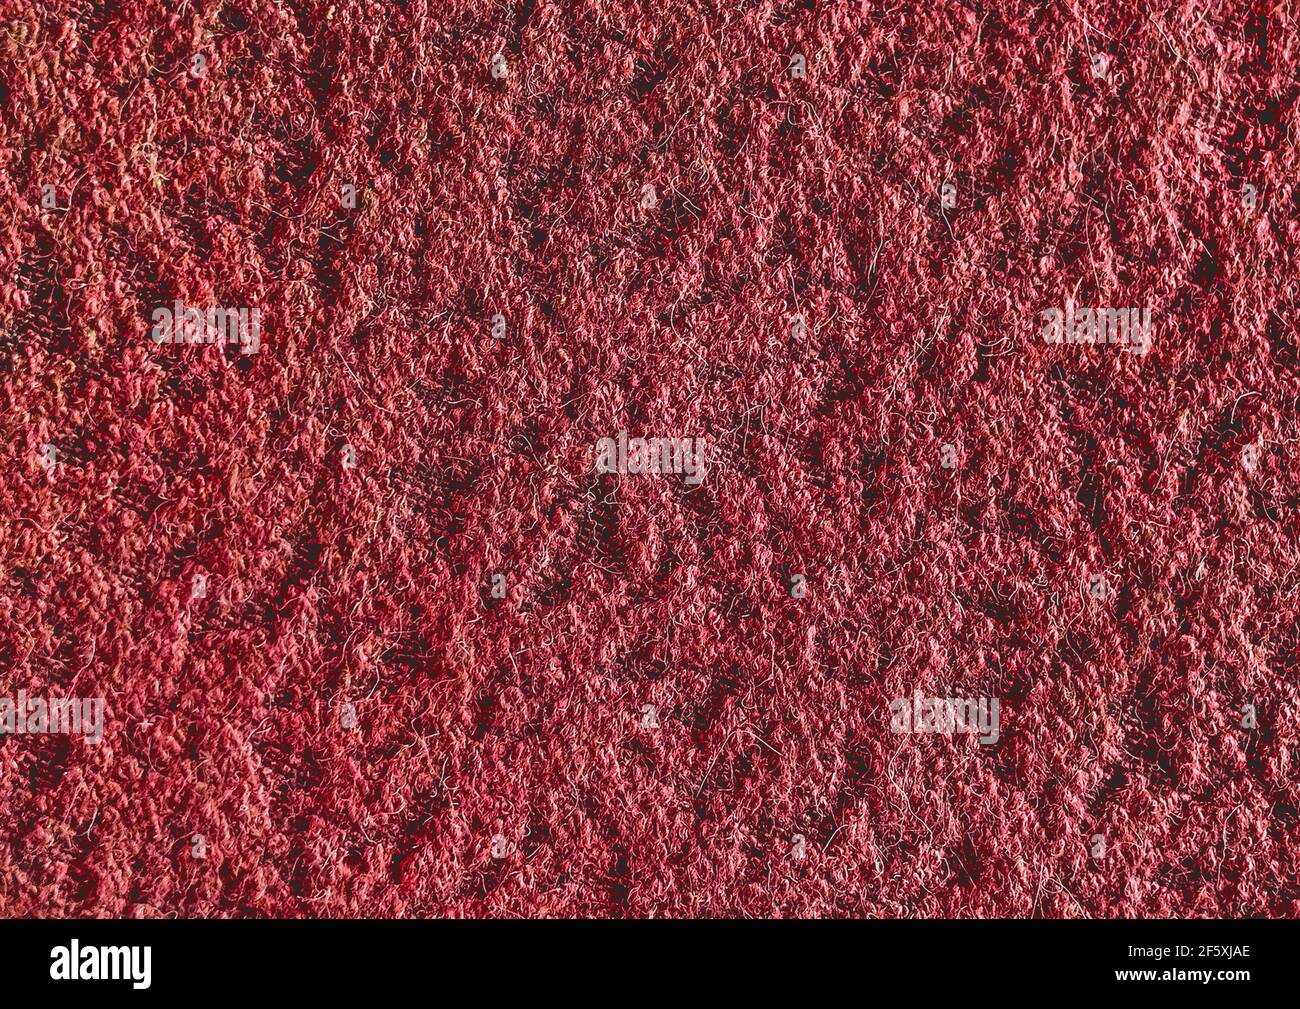 Large patch on red cloth stock photo. Image of cotton - 17756424